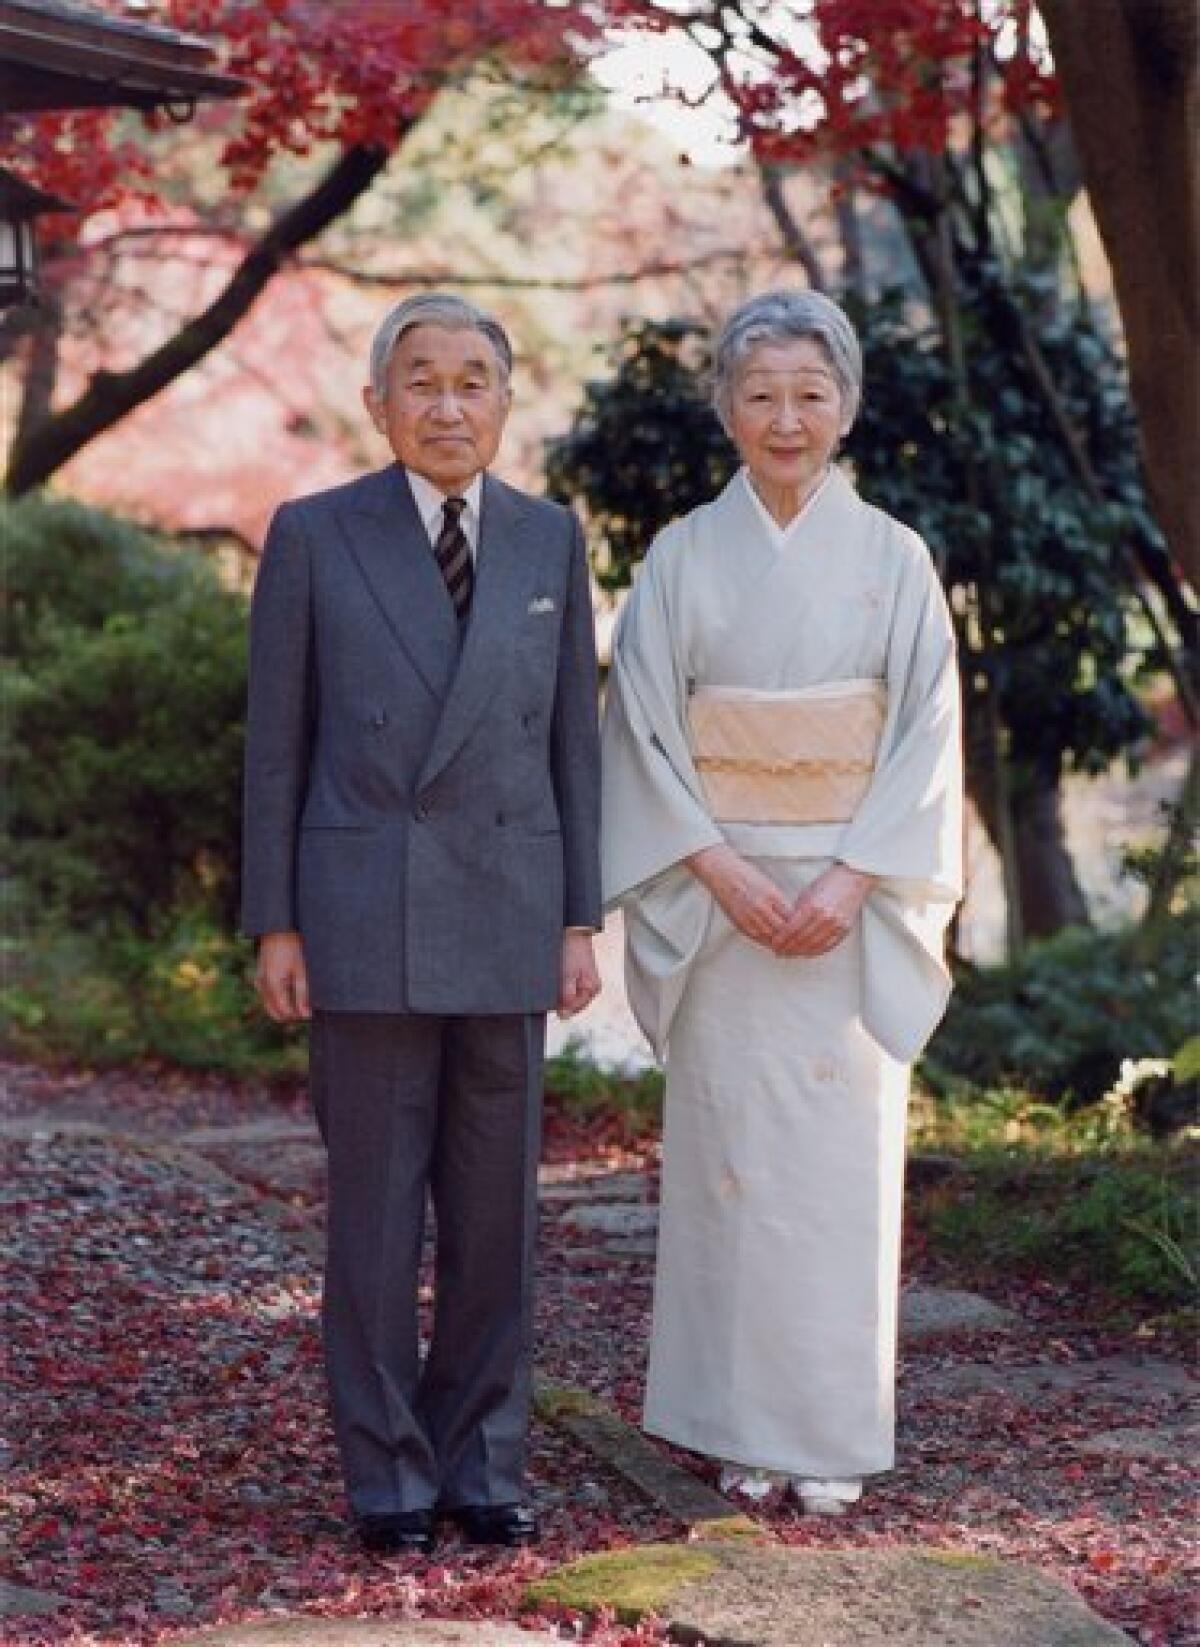 In this photo taken on Monday, Nov. 29, 2010 and released by the Imperial Household Agency of Japan, Emperor Akihito and Empress Michiko stand together by Sokintei arbor during their stroll at Fukiage Garden in the Imperial Palace in Tokyo. Akihito celebrates his 77th birthday Thursday, Dec. 23, 2010. (AP Photo/Imperial Household Agency of Japan) EDITORIAL USE ONLY